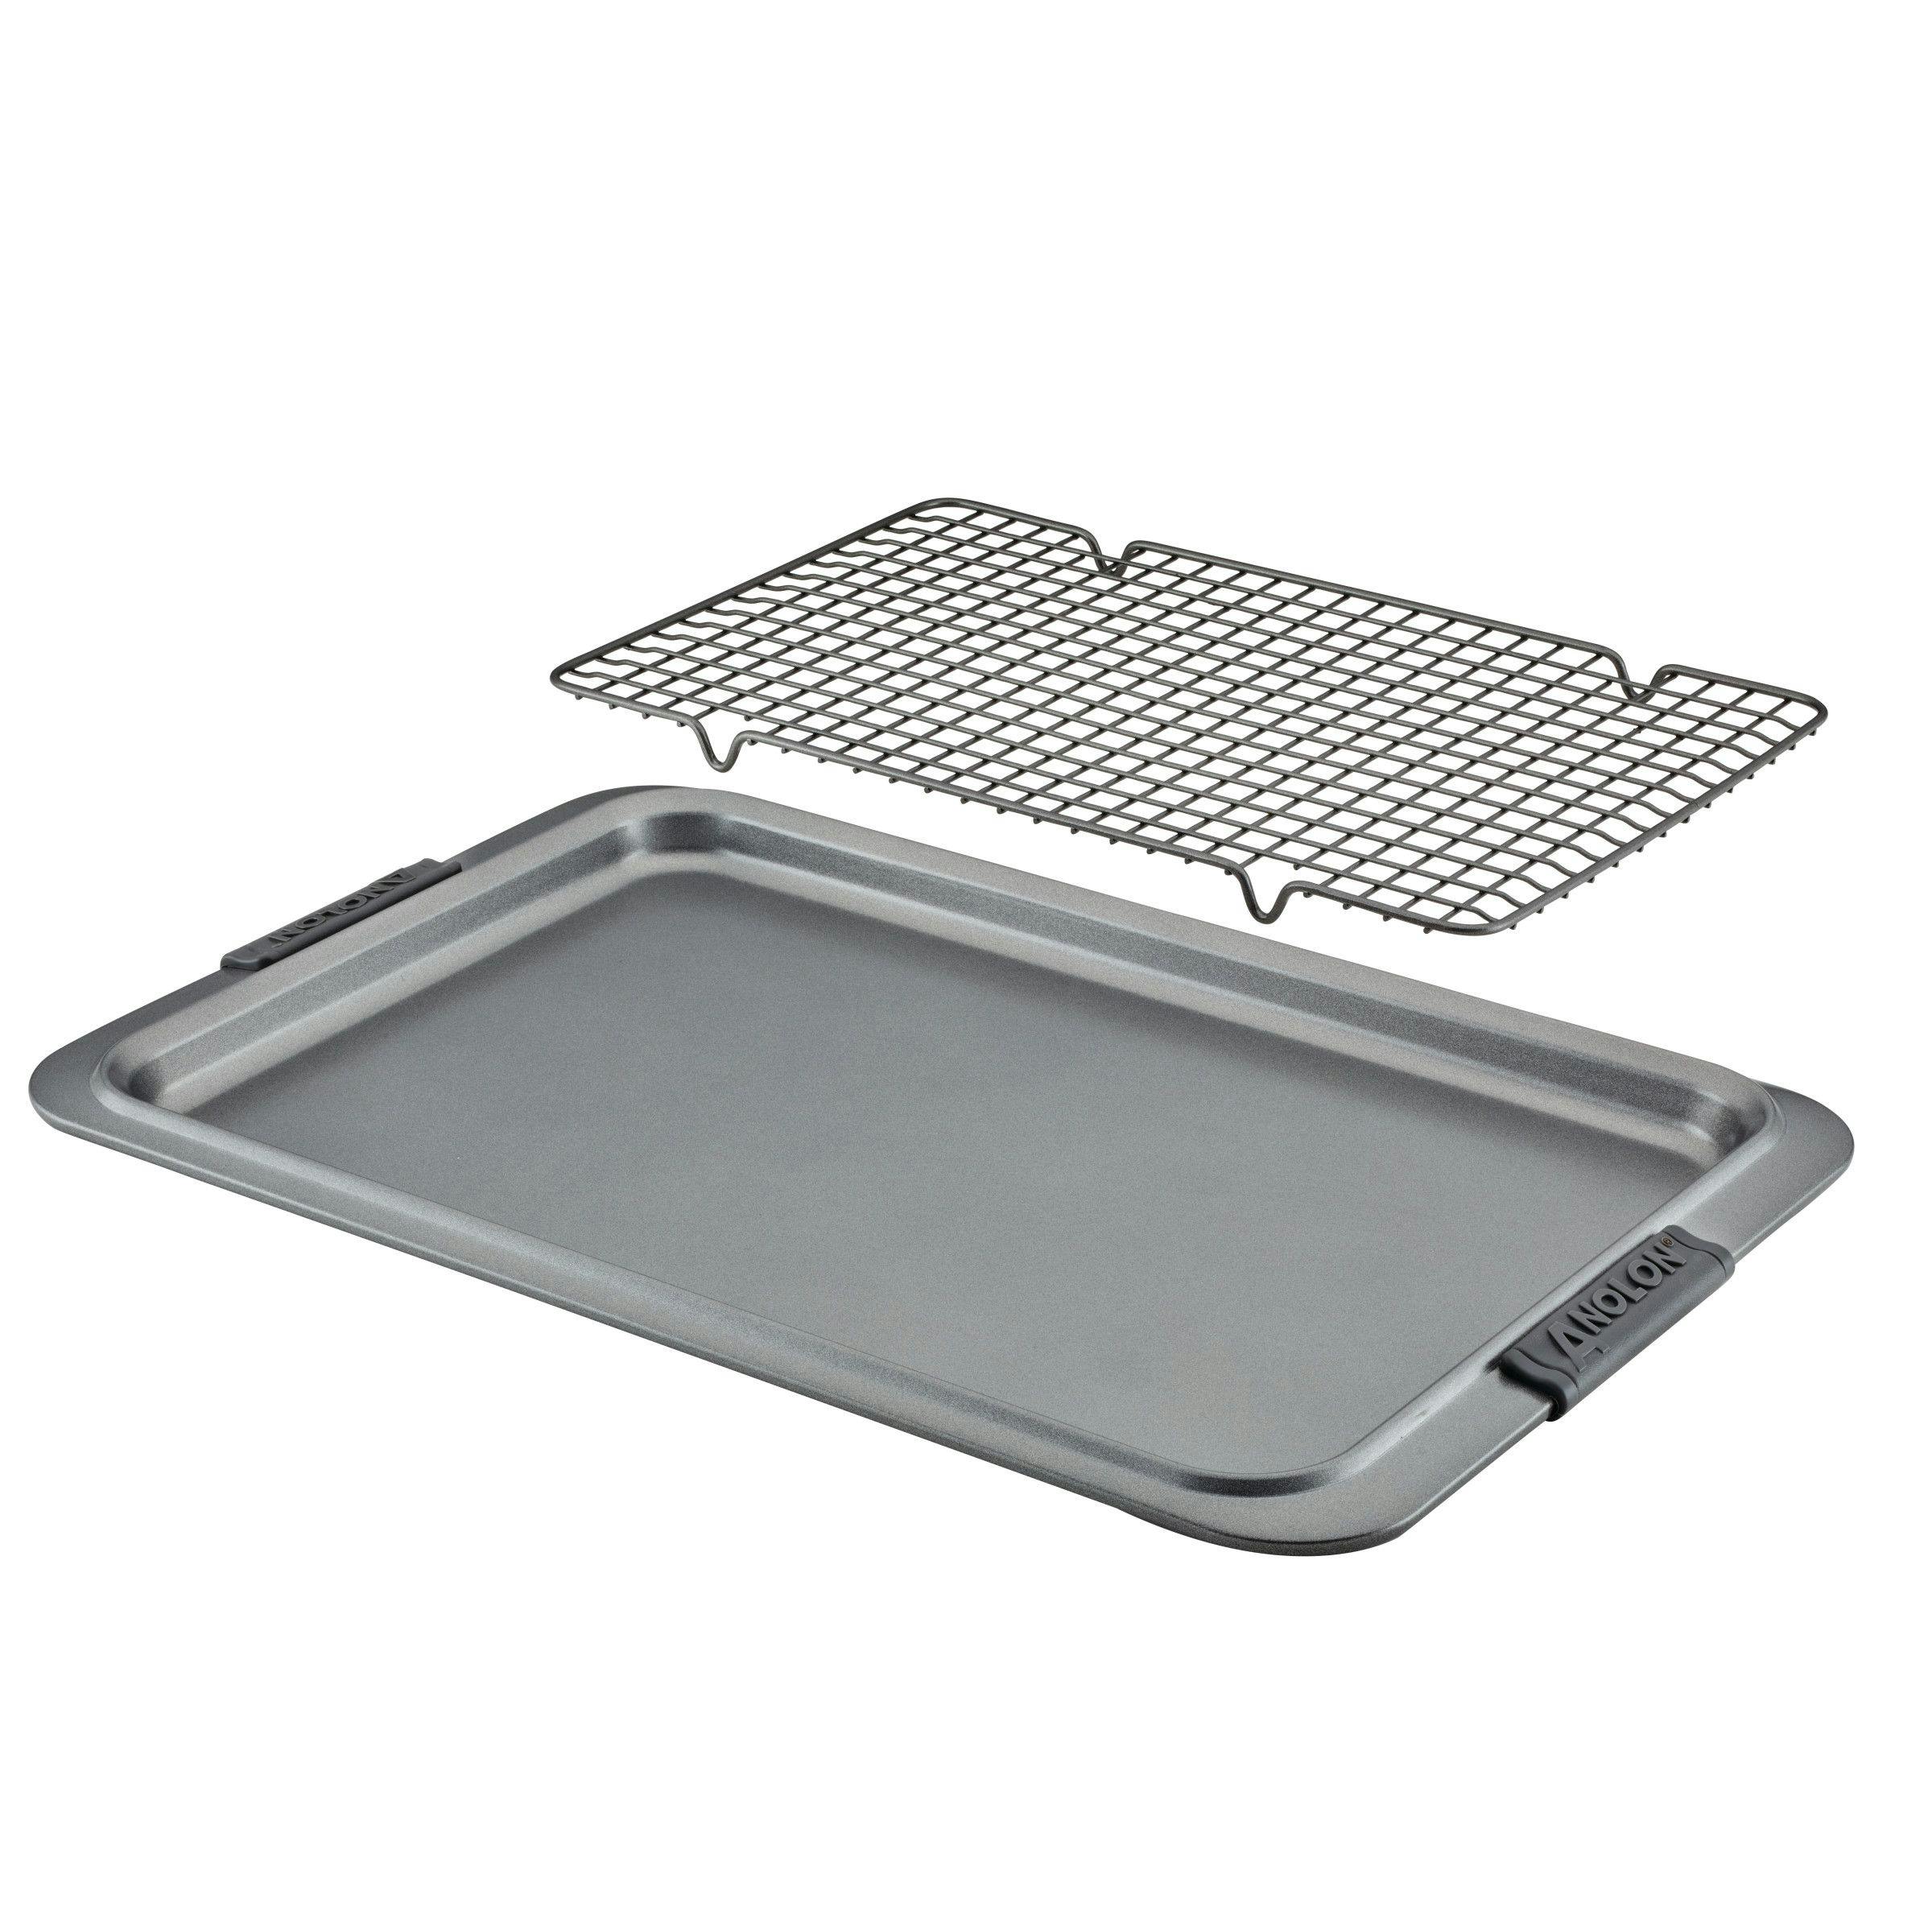 Anolon Advanced Nonstick Bakeware and Cooling Rack Set, 11-Inch x 17-Inch, Gray